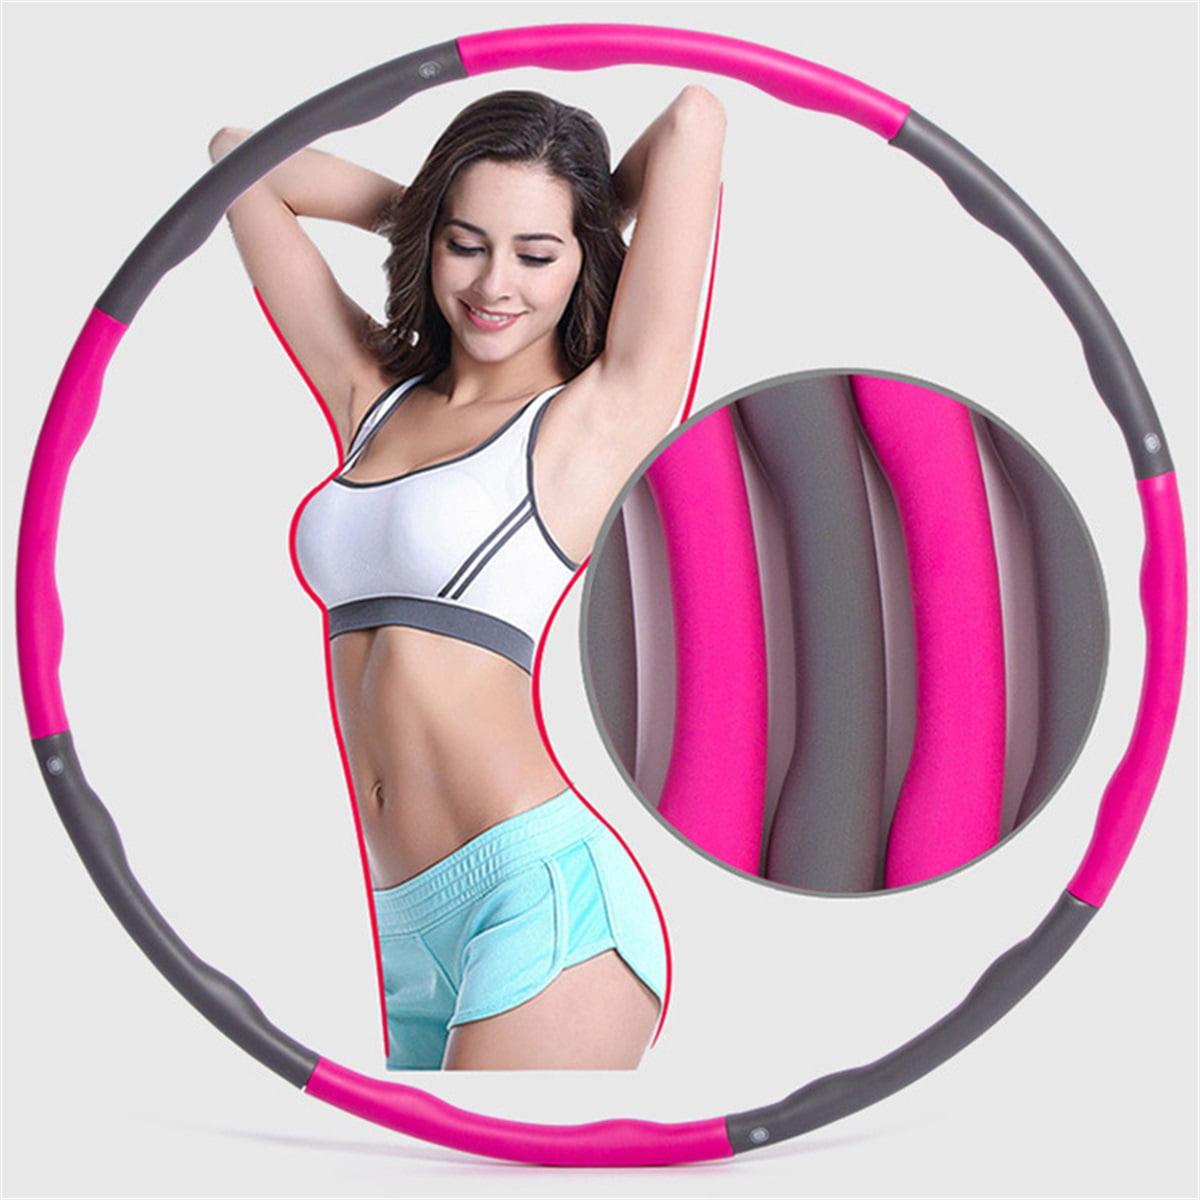 Adults Professional Detachable Exercise Weighted Hoola Hoop Adjustable Size 8 Section Fitness Hula Hoop for Women